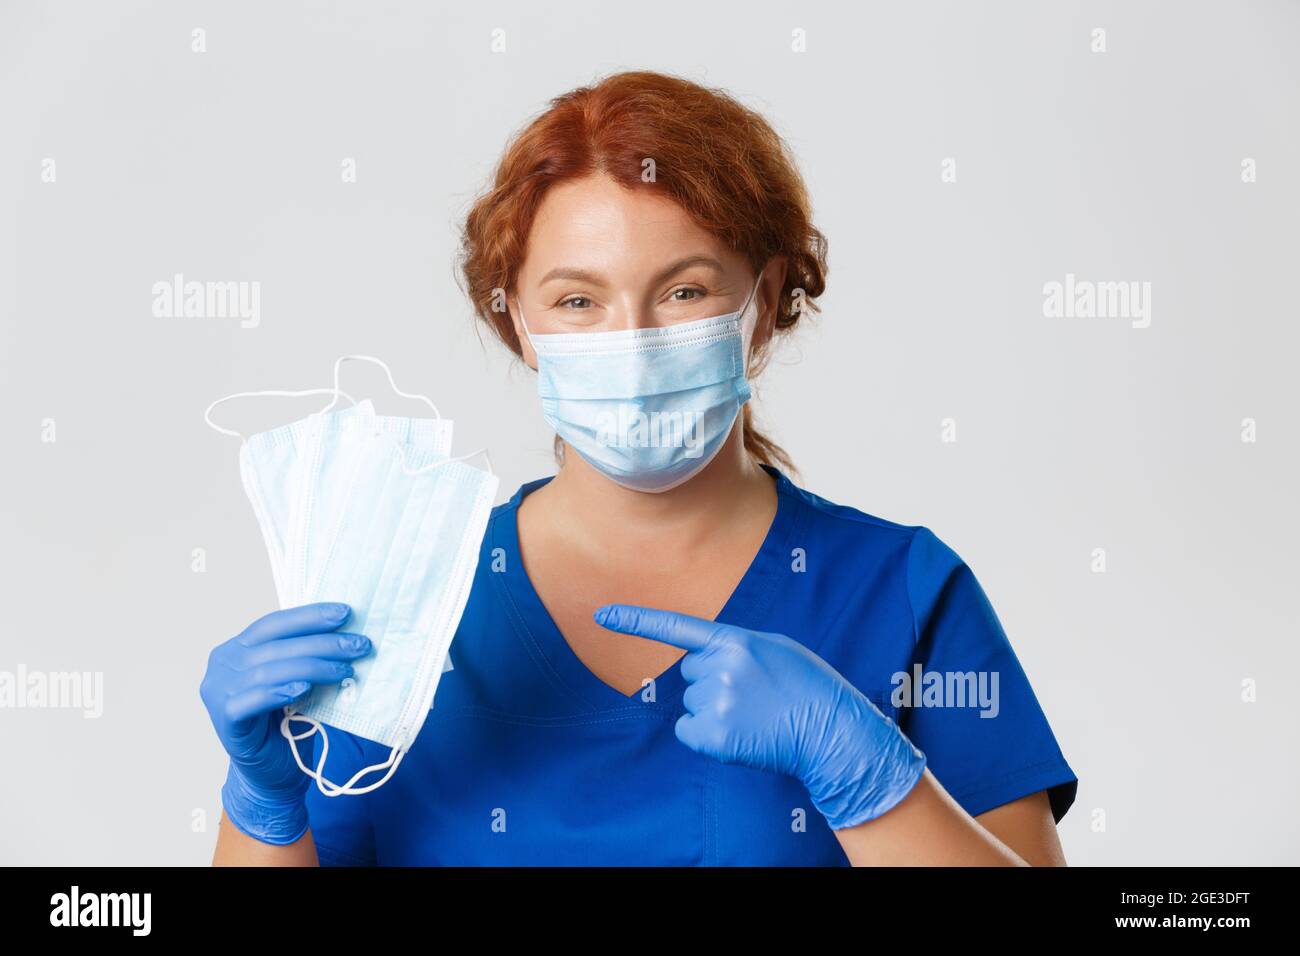 Medical workers, covid-19 pandemic, coronavirus concept. Close-up of smiling caring female nurse, doctor in rubber gloves pointing at face masks, ask Stock Photo